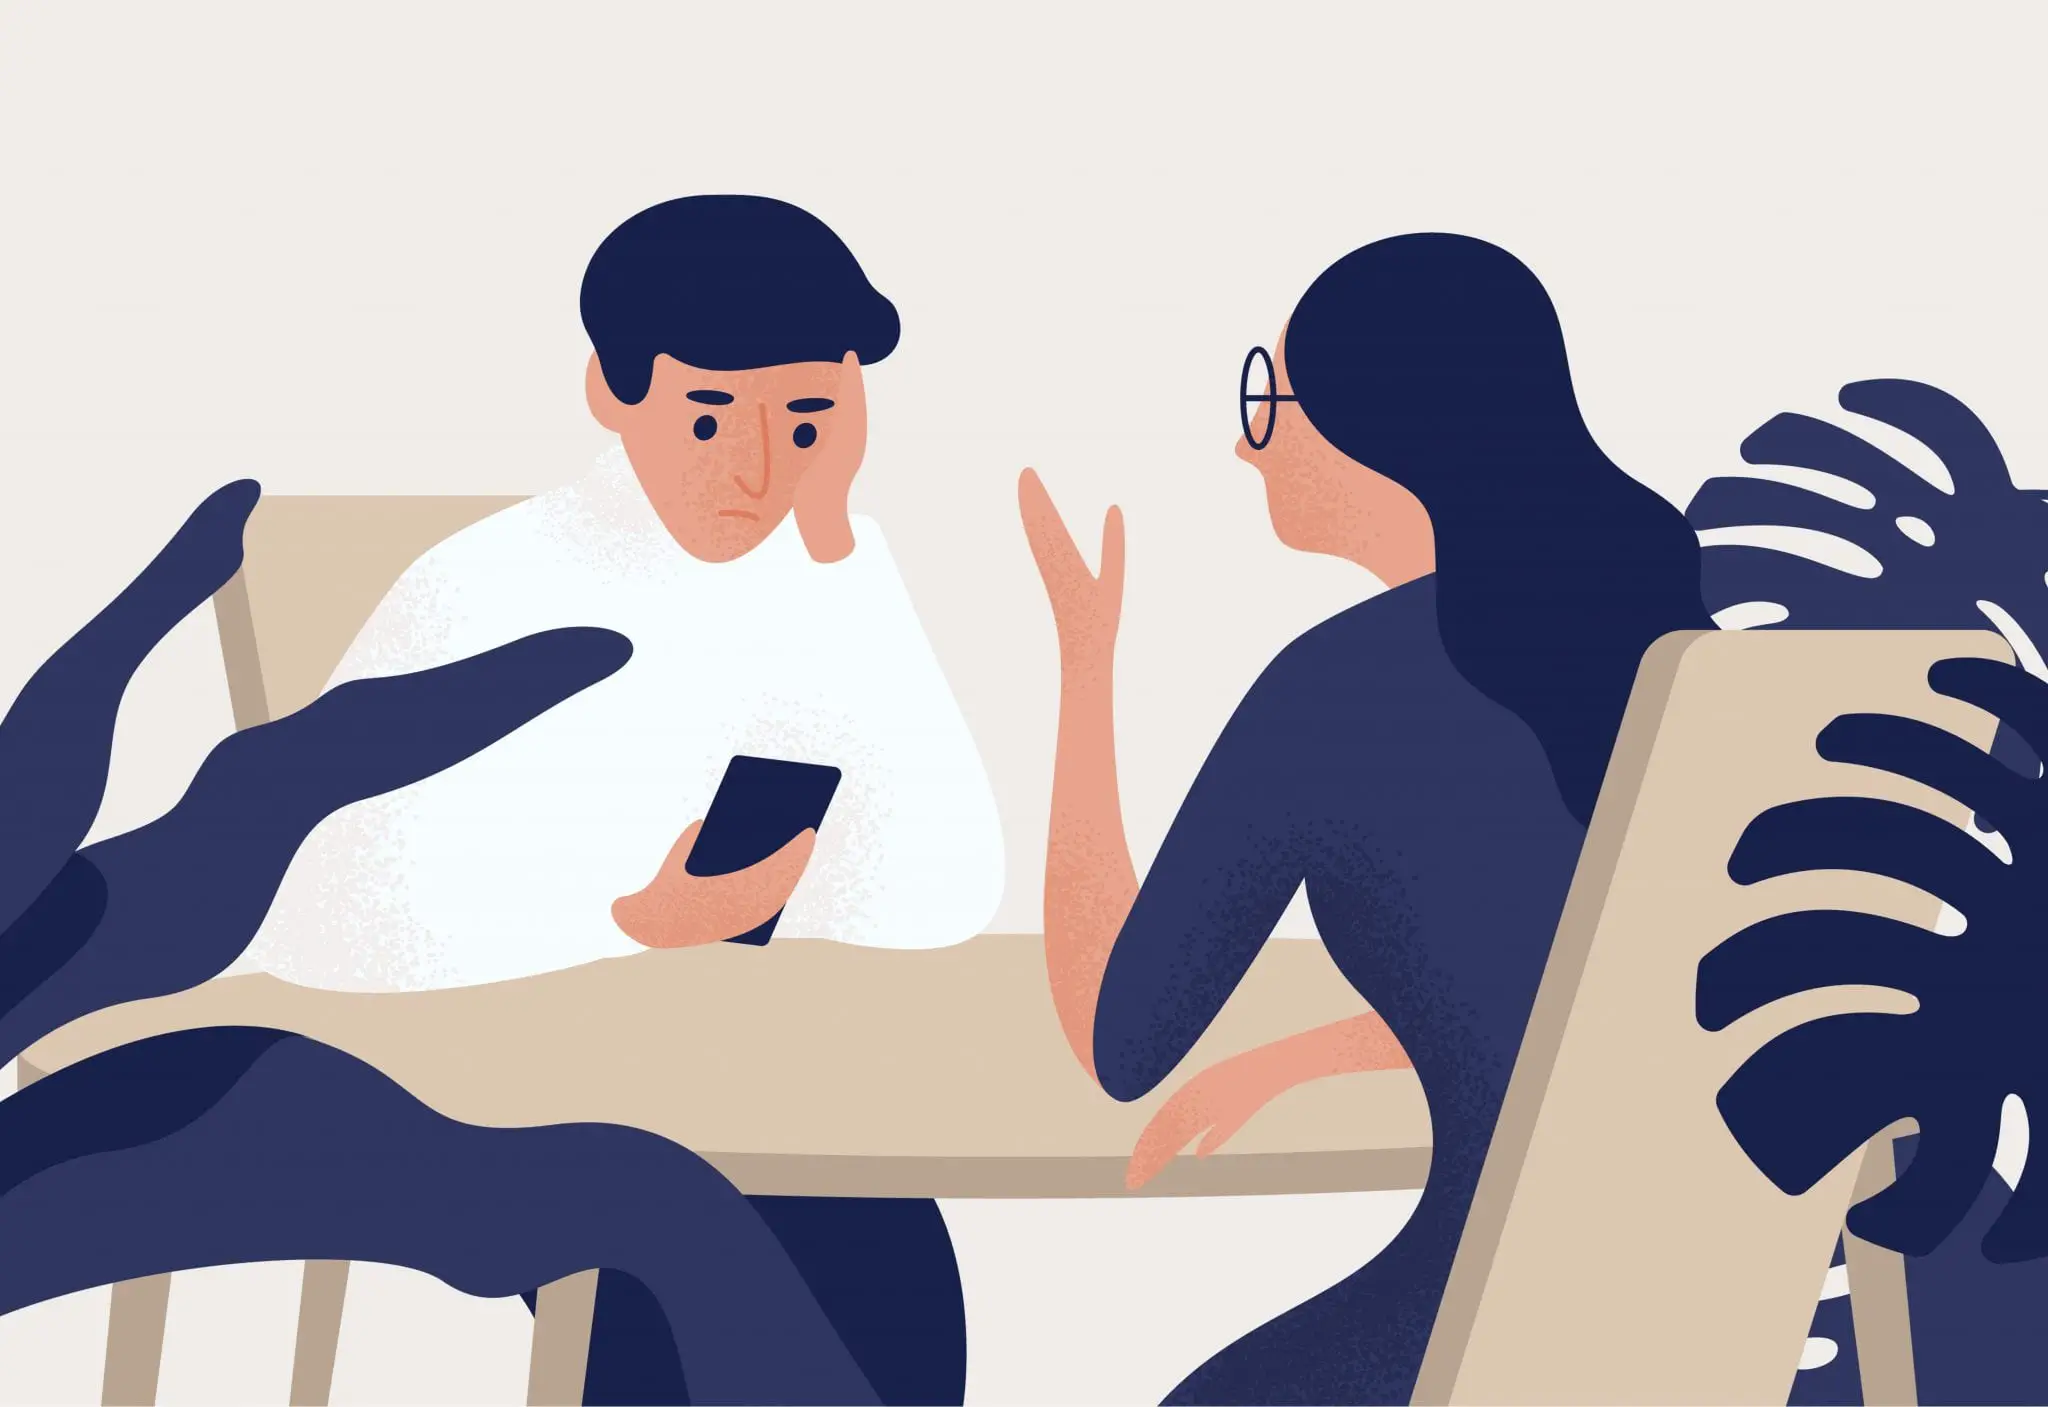 Couple Sitting at Table, Woman Talking to Her Partner, Man Looking at His Smartphone. Estrangement in Romantic Relationship, Emotional Distancing